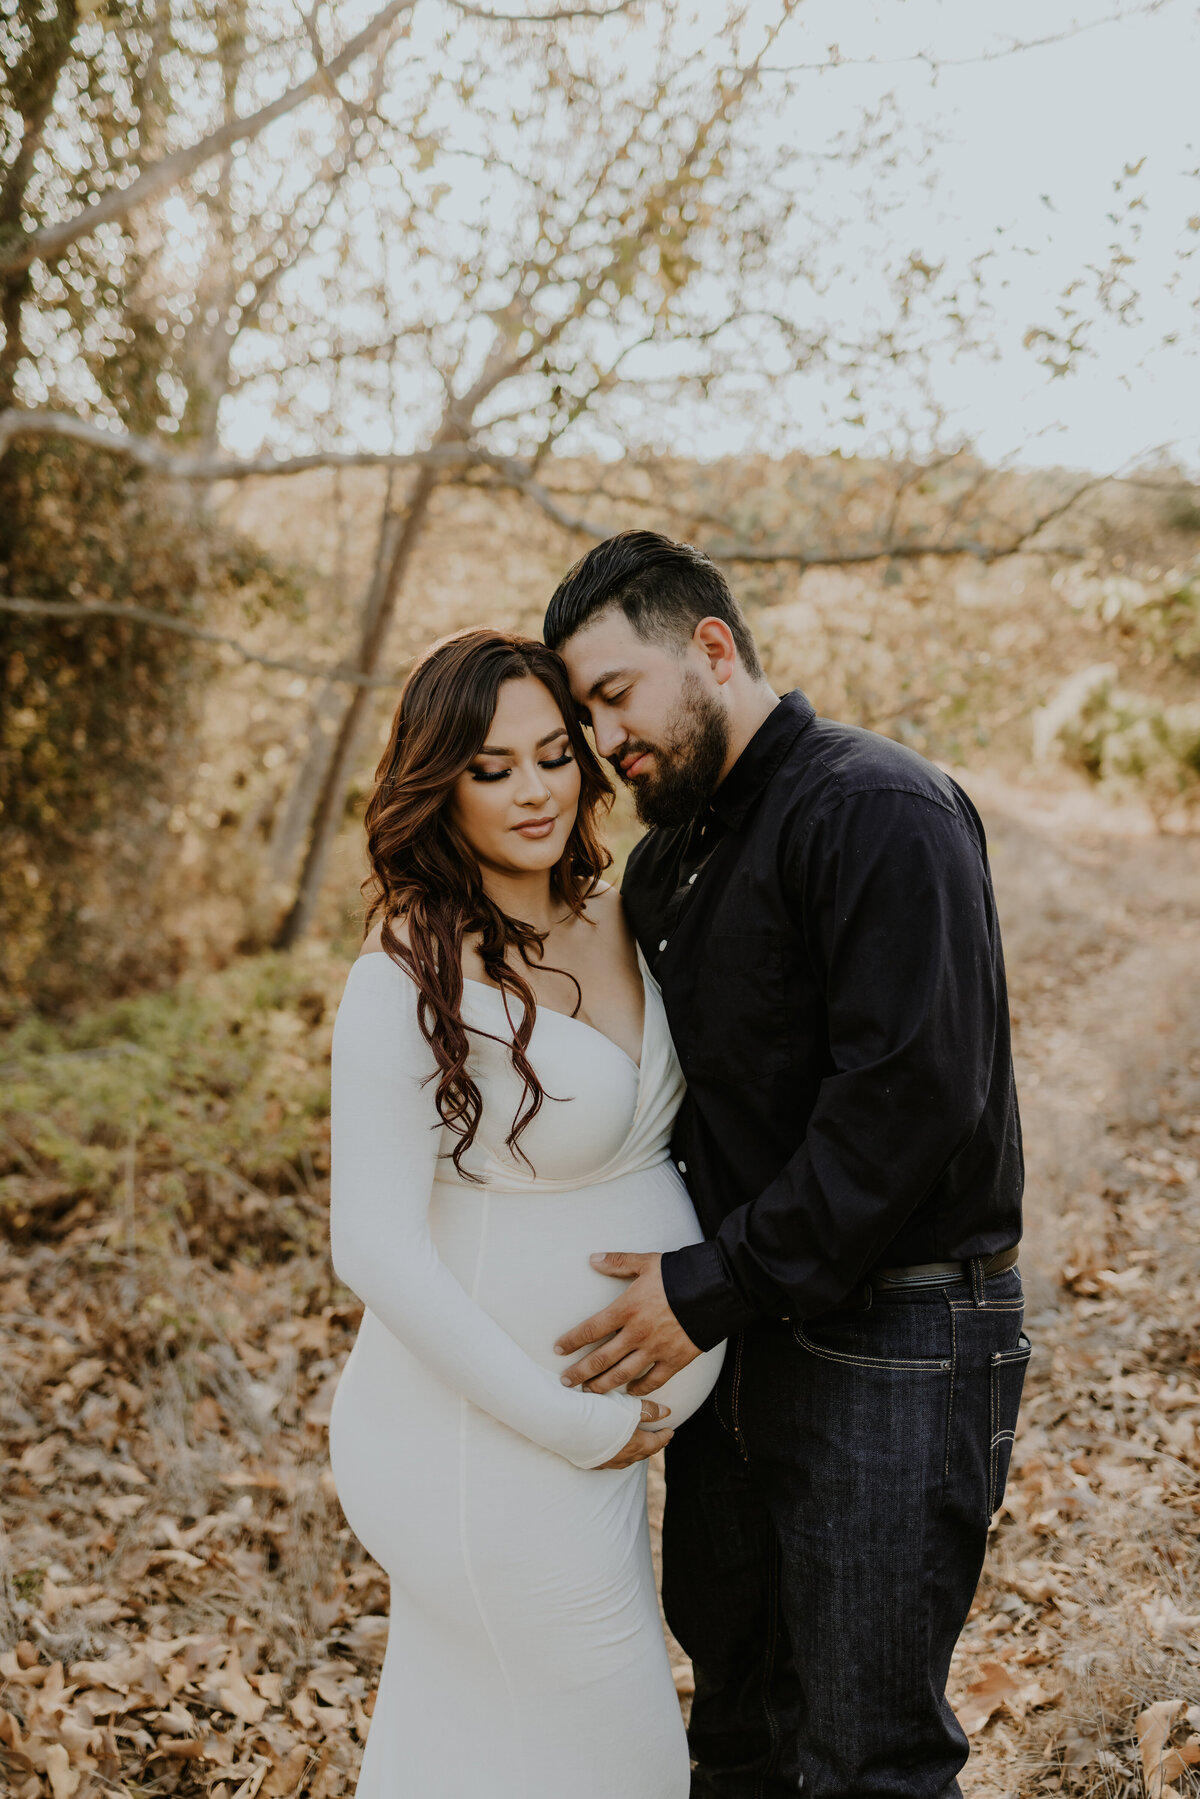 Dreamy and beautiful maternity photos with long dress Temecula, California Wedding and lifestyle photographer Yescphotography